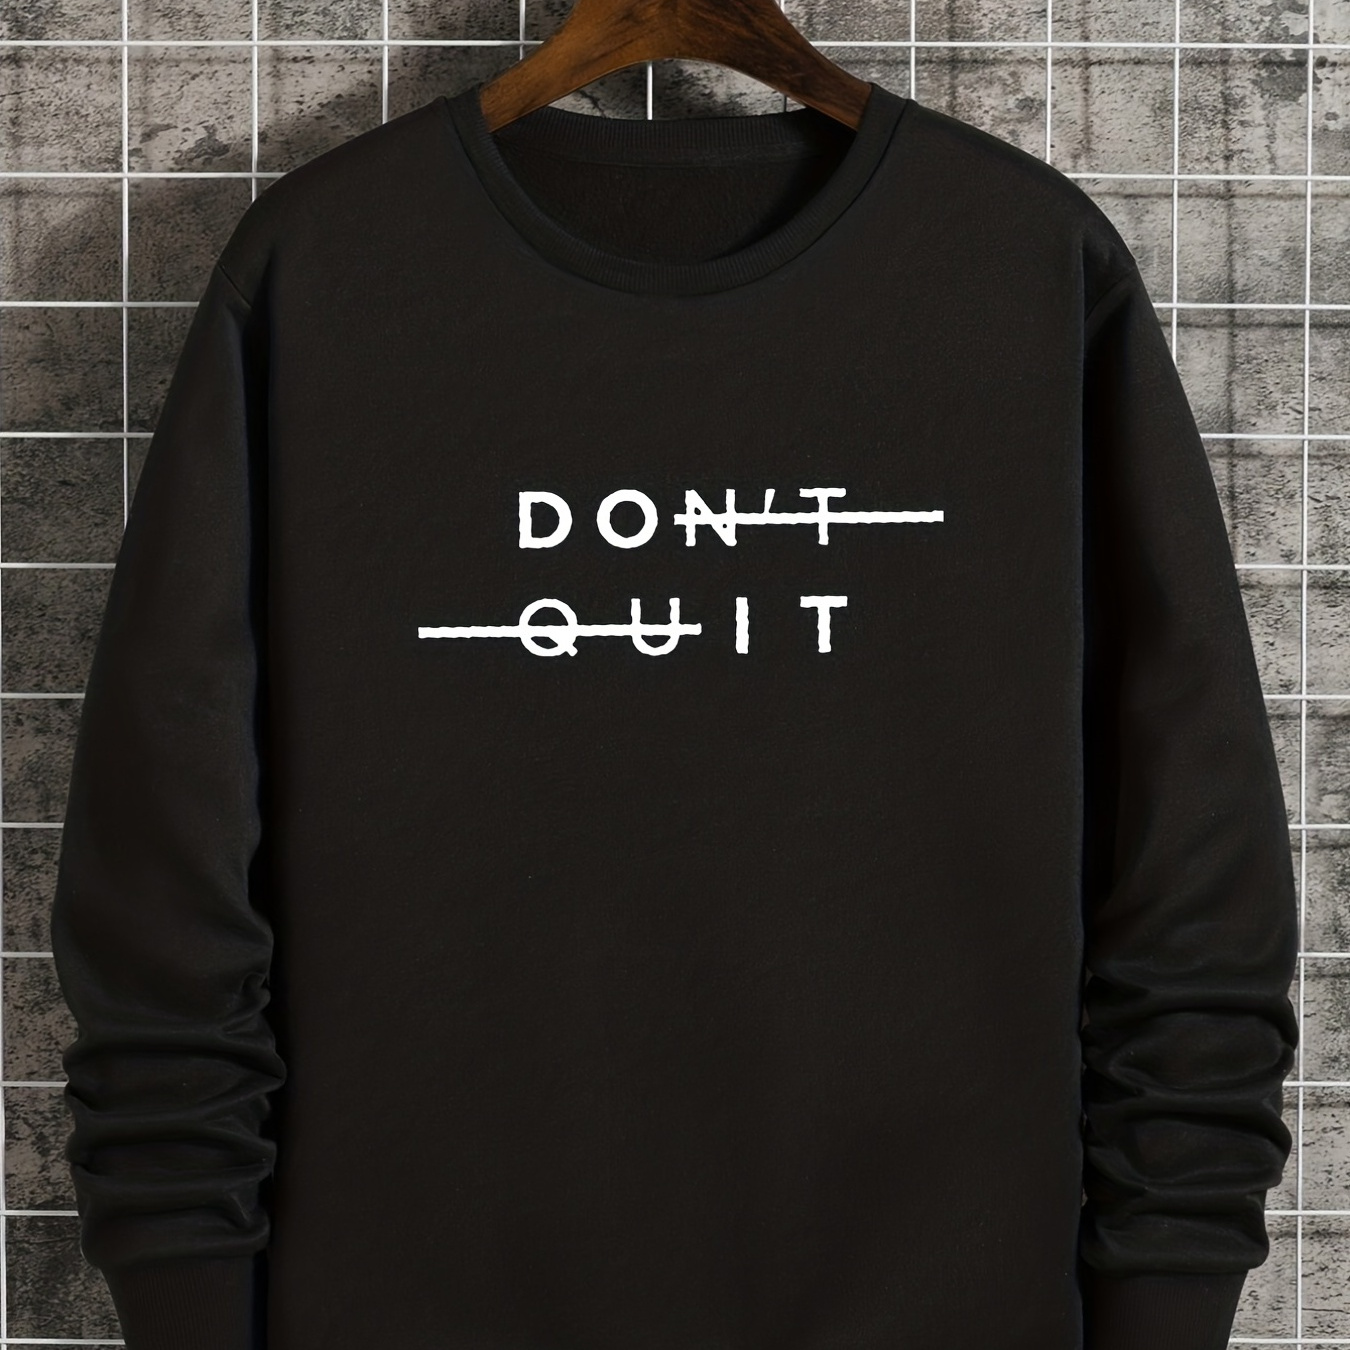 

Don't Quit Print Sweatshirt, Men's Casual Graphic Design Slightly Stretch Crew Neck Pullover Sweatshirt For Spring Fall